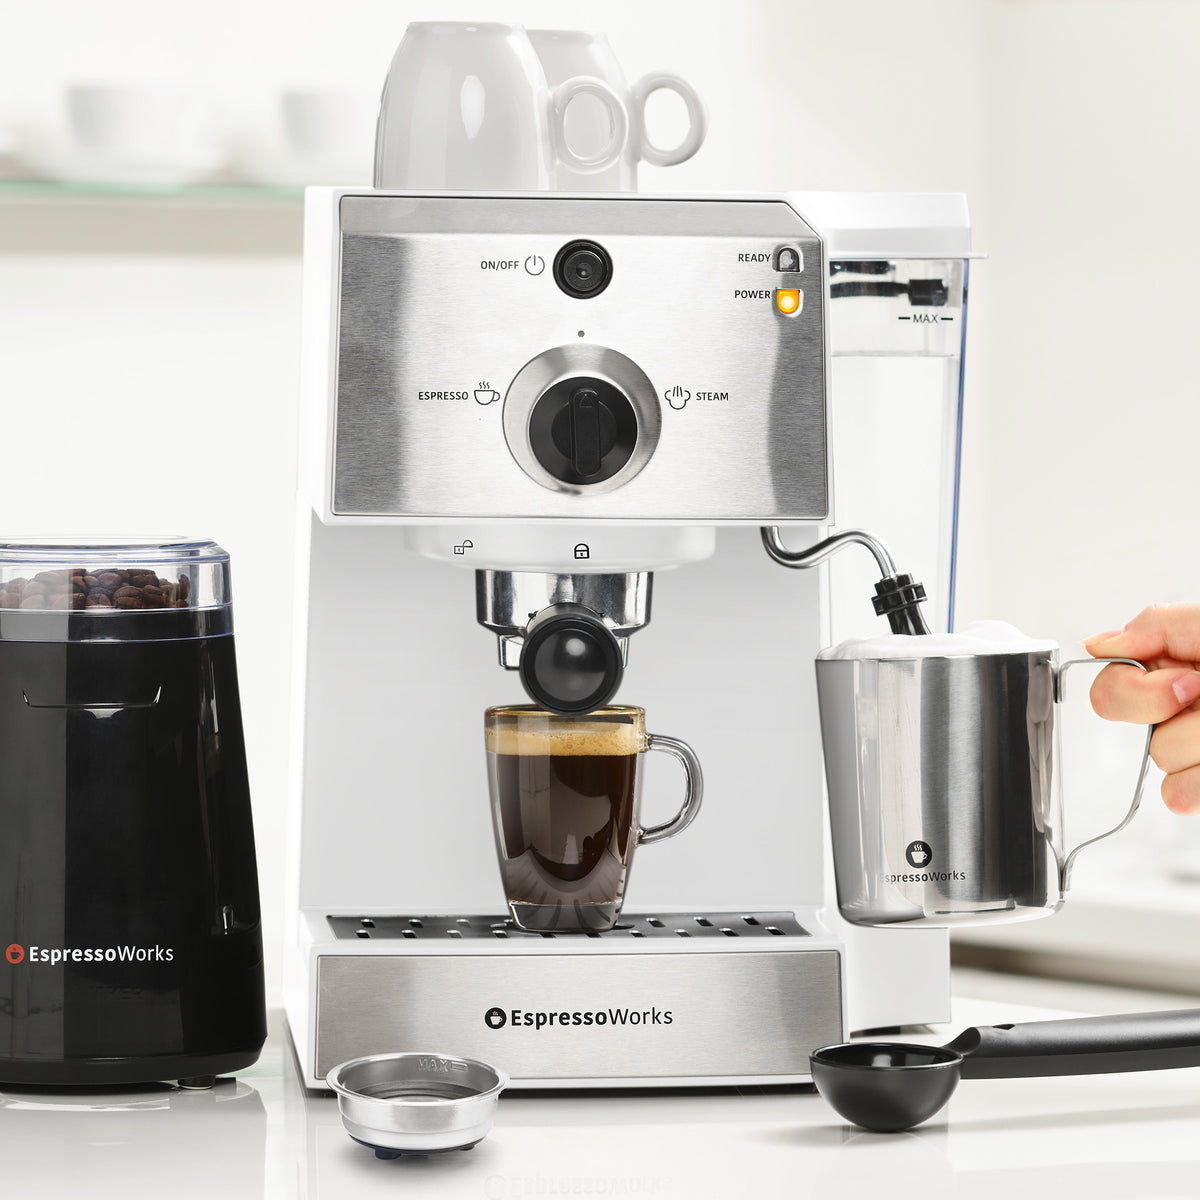 Espresso Works All-In-One: you get what you pay for